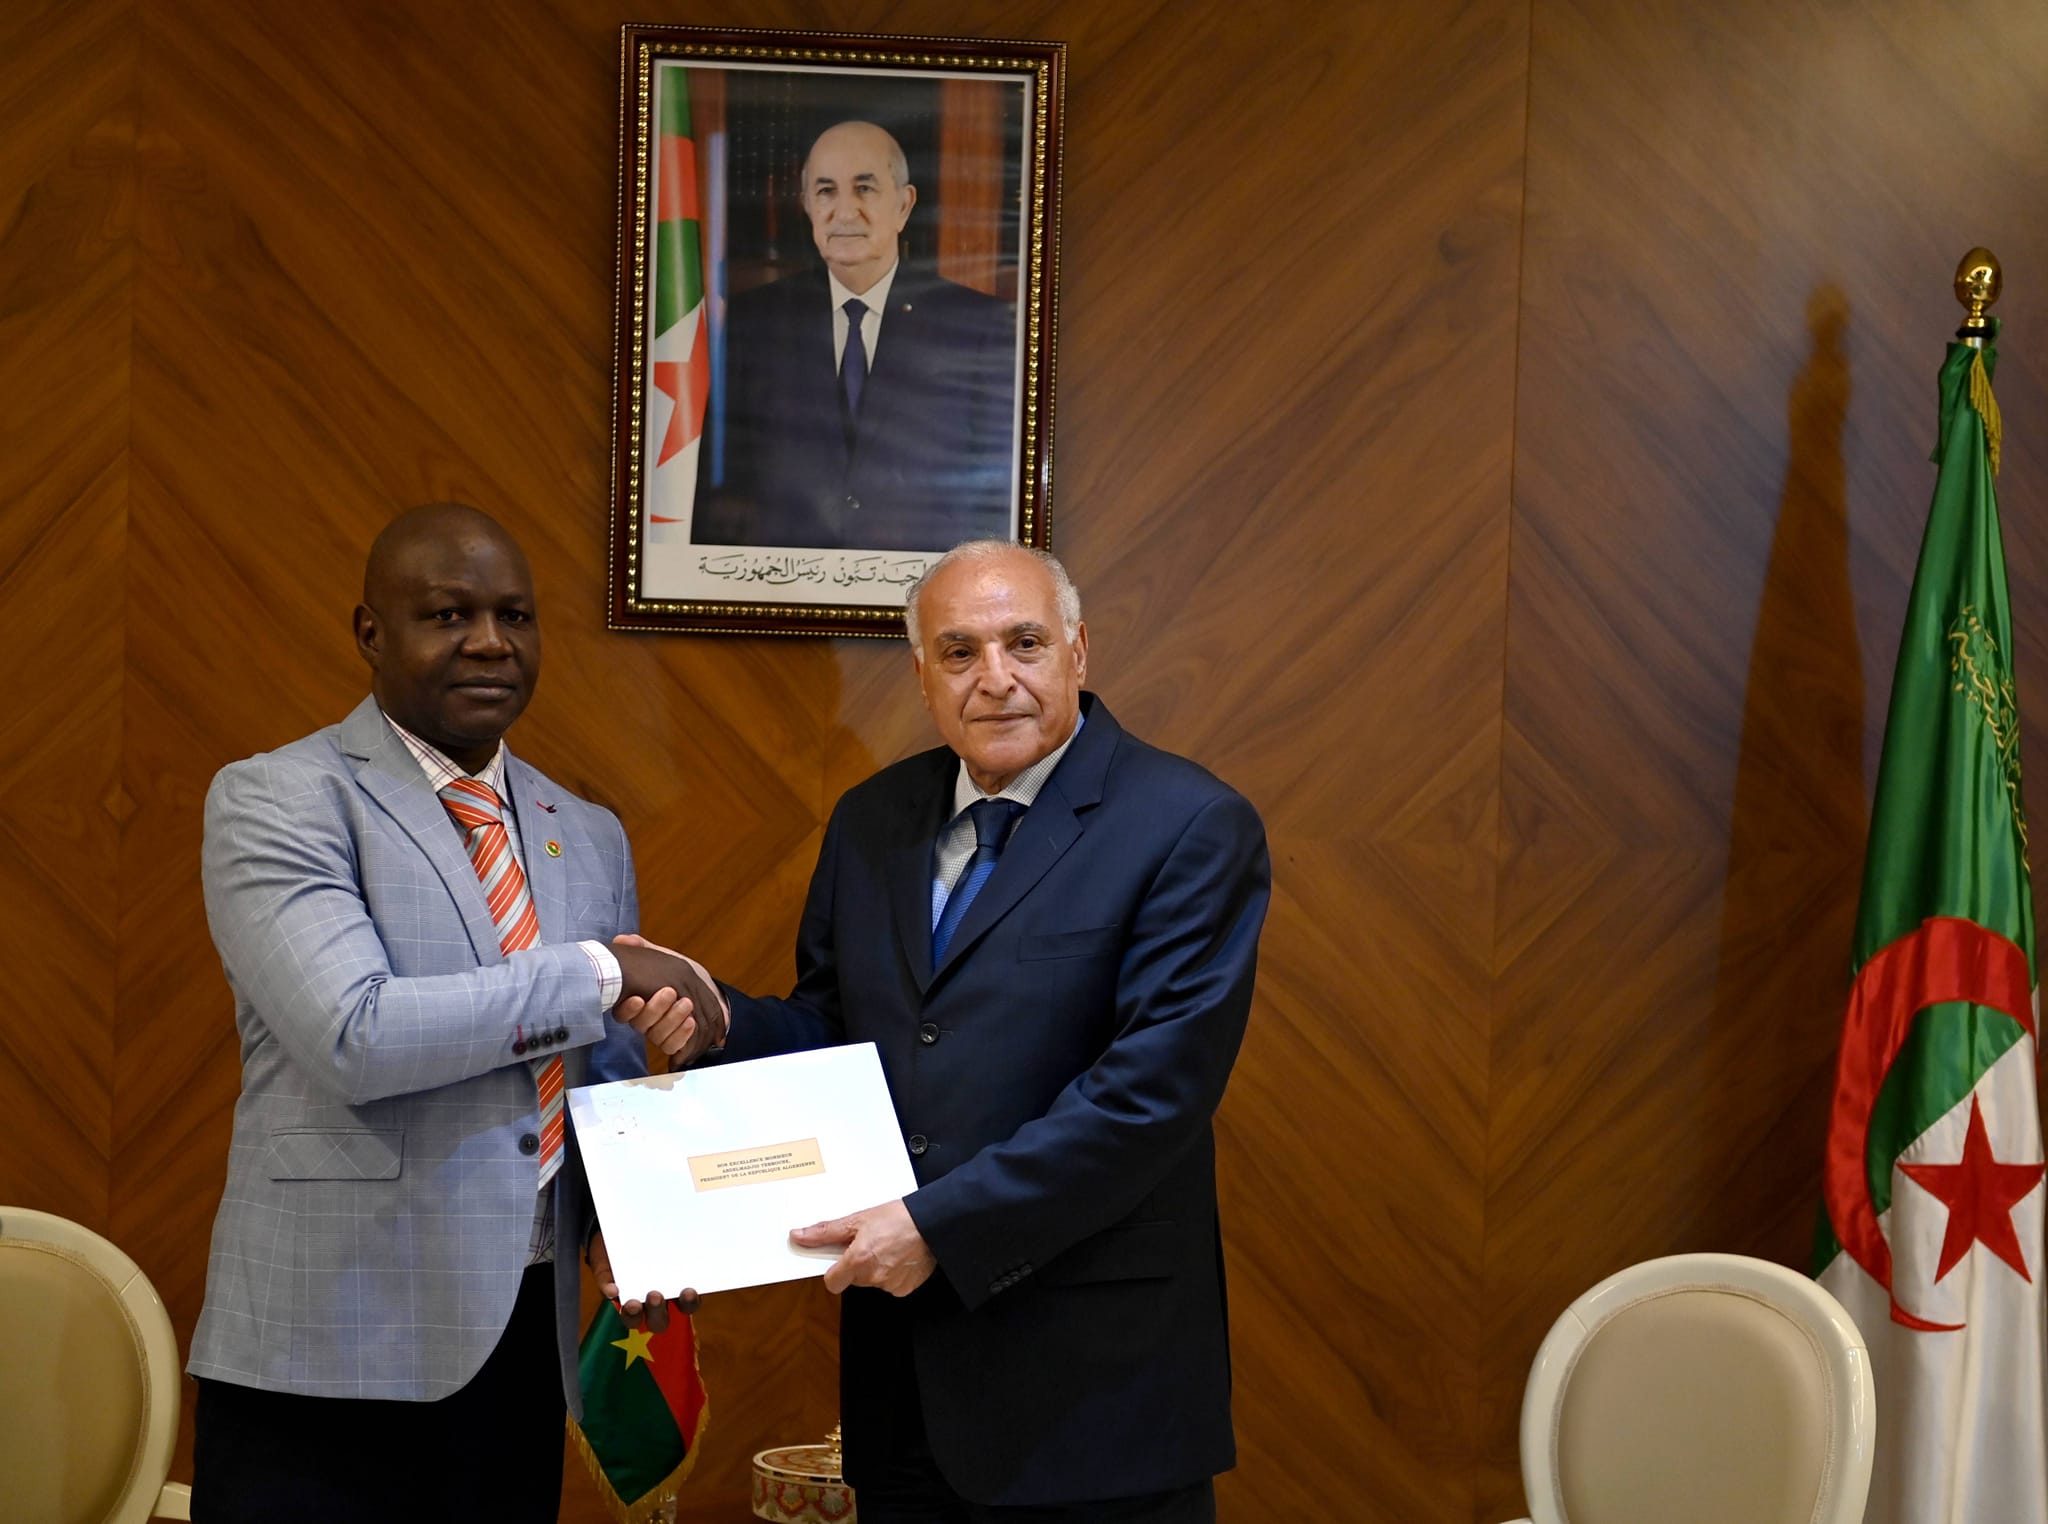 The transitional president of Burkina Faso sends a written message to President Tebboune